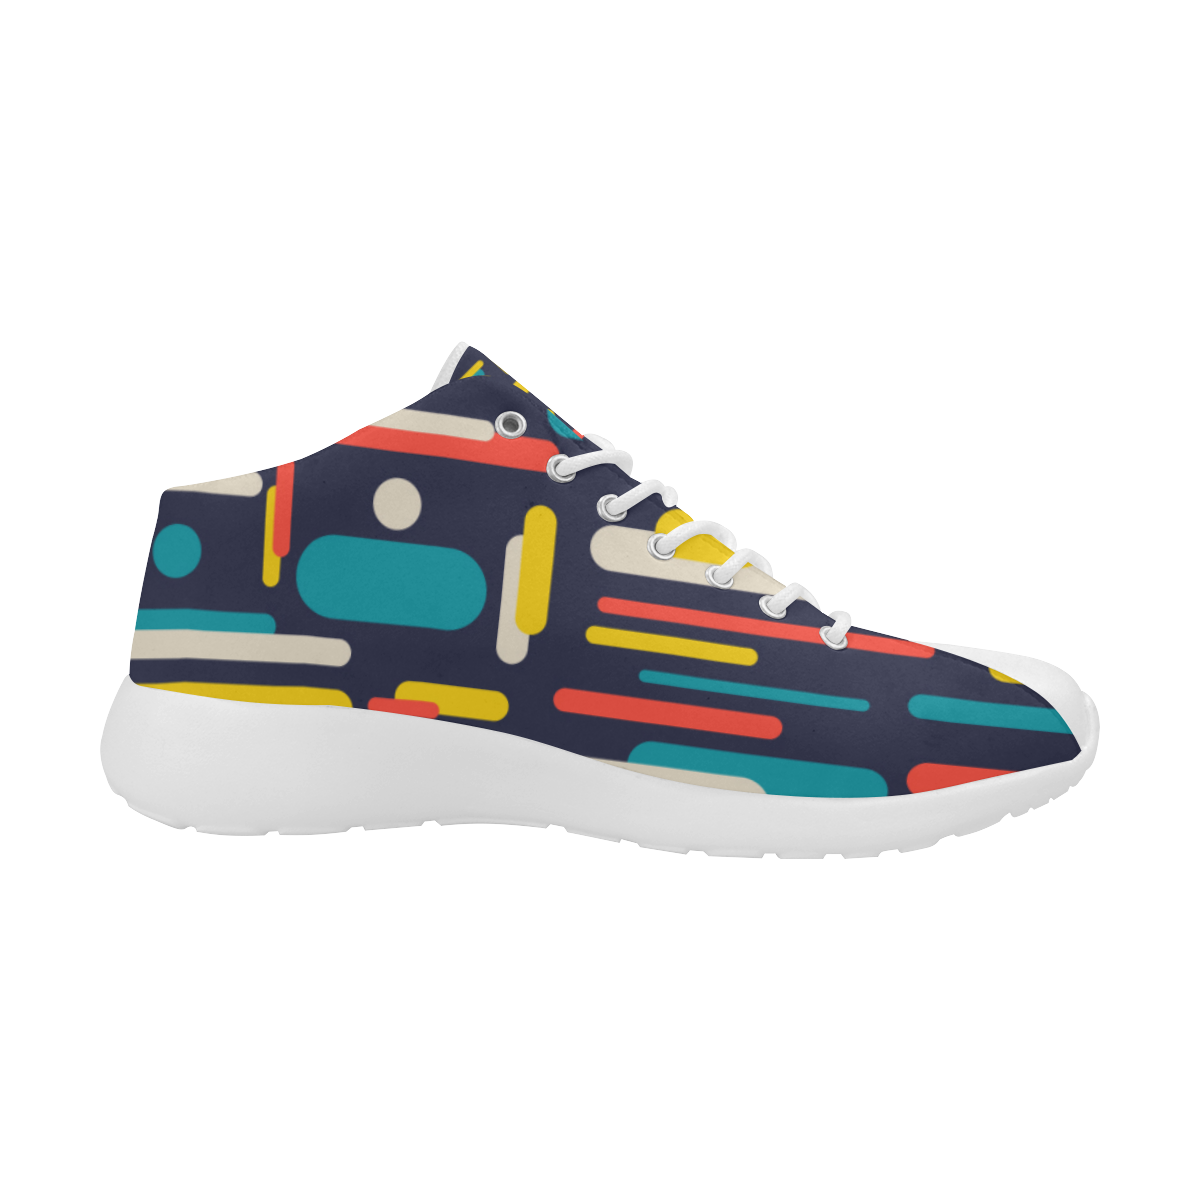 Colorful Rectangles Women's Basketball Training Shoes/Large Size (Model 47502)